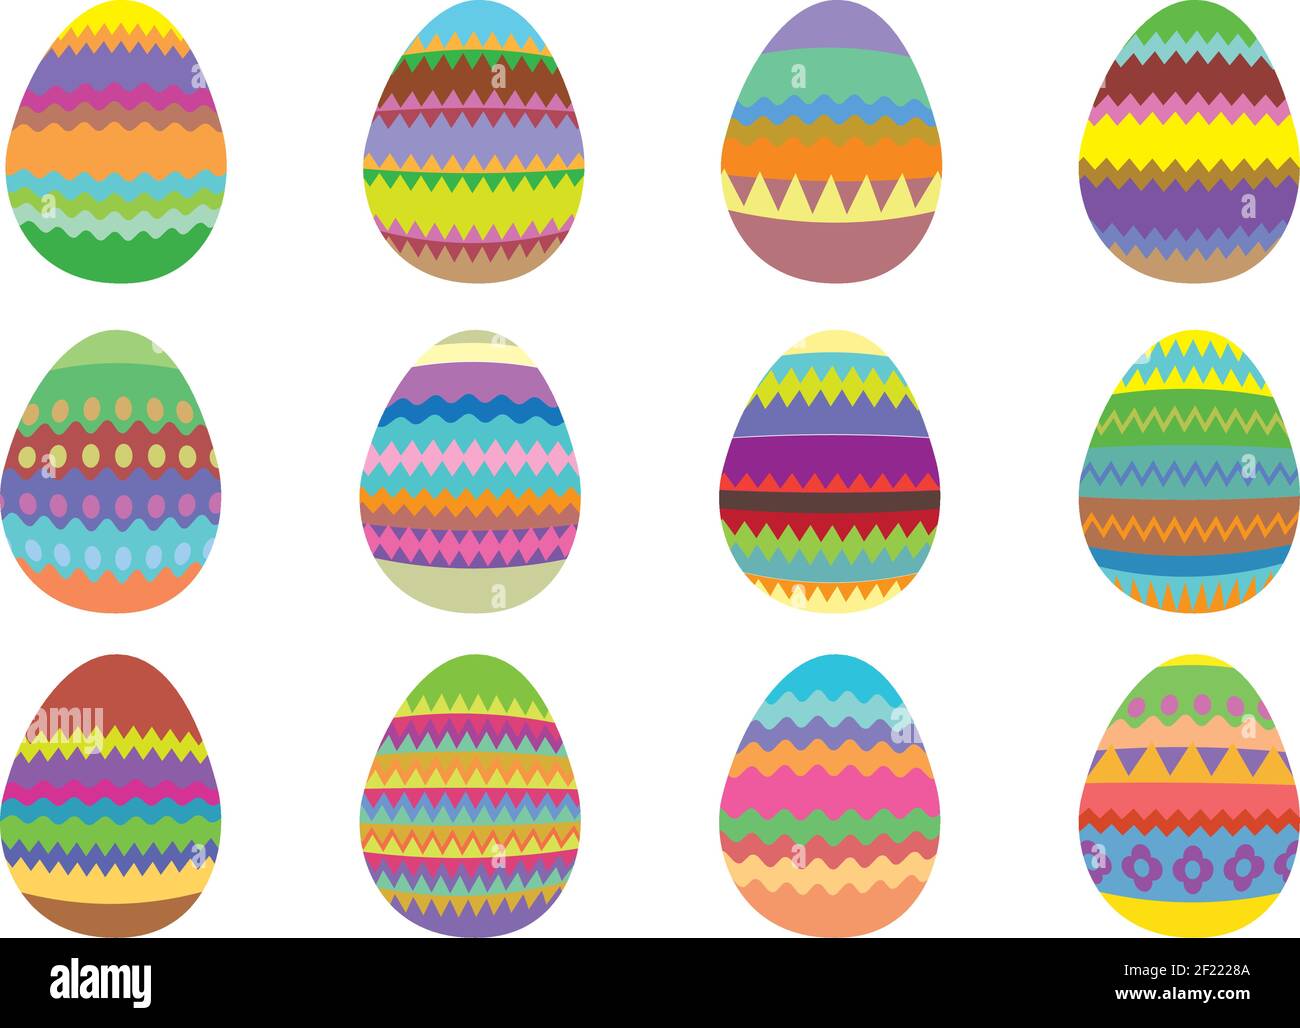 Set of 12 colourful Easter eggs on a white background. Isolated vector illustration. Stock Vector